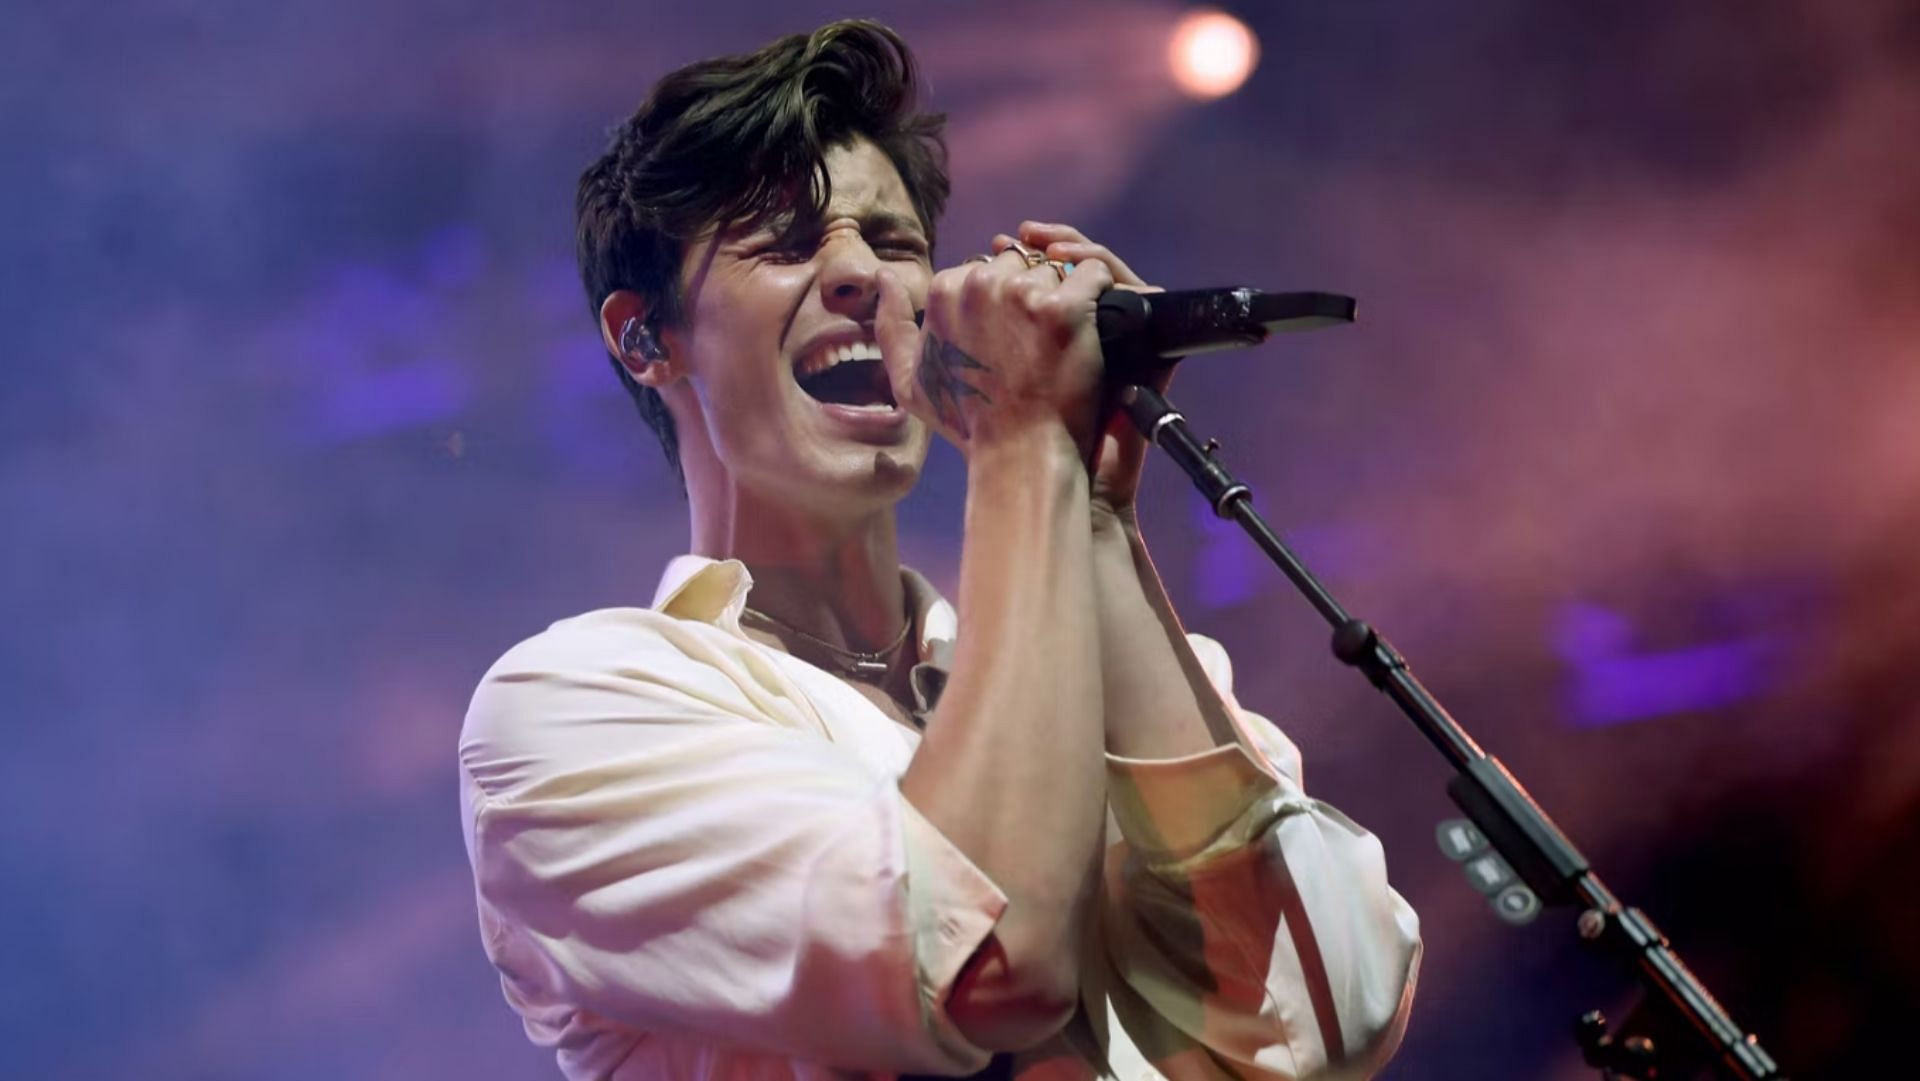 Shawn Mendes has postponed his July tour dates (Image via Hutton Supancic/Getty)